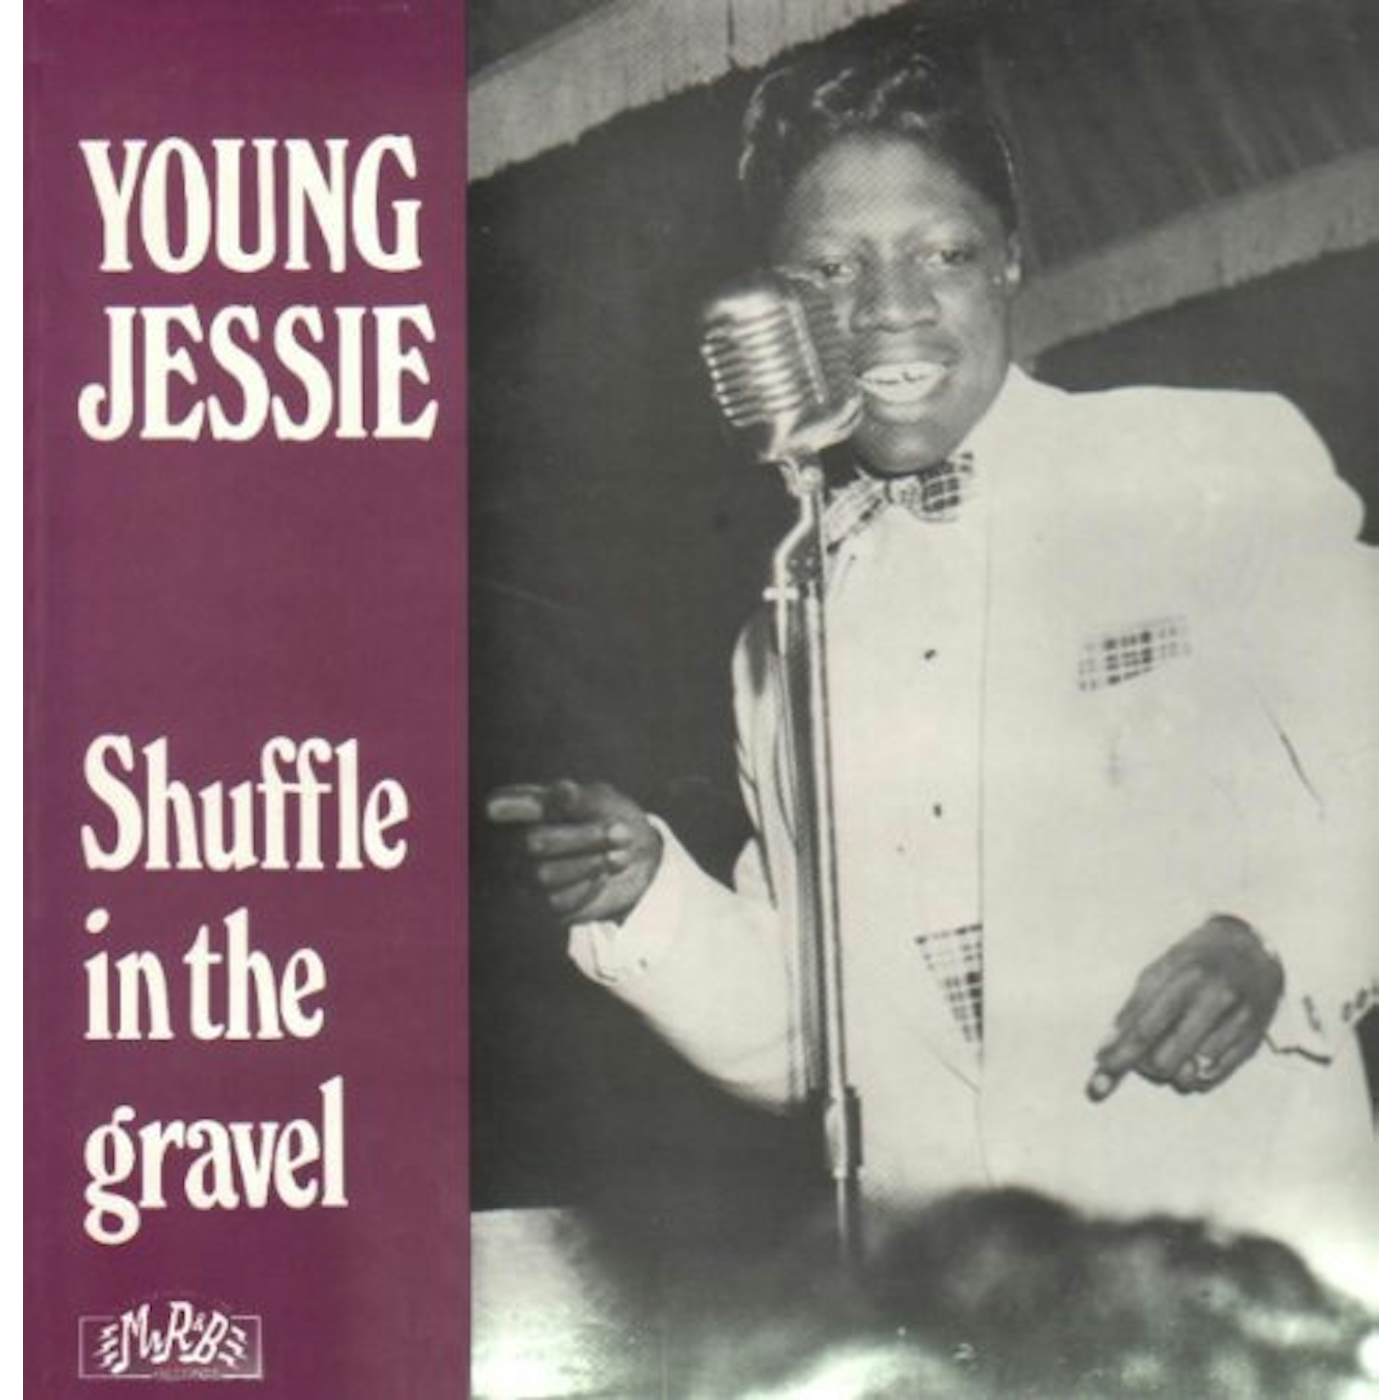 Jesse Young SHUFFLE IN THE GRAVEL Vinyl Record